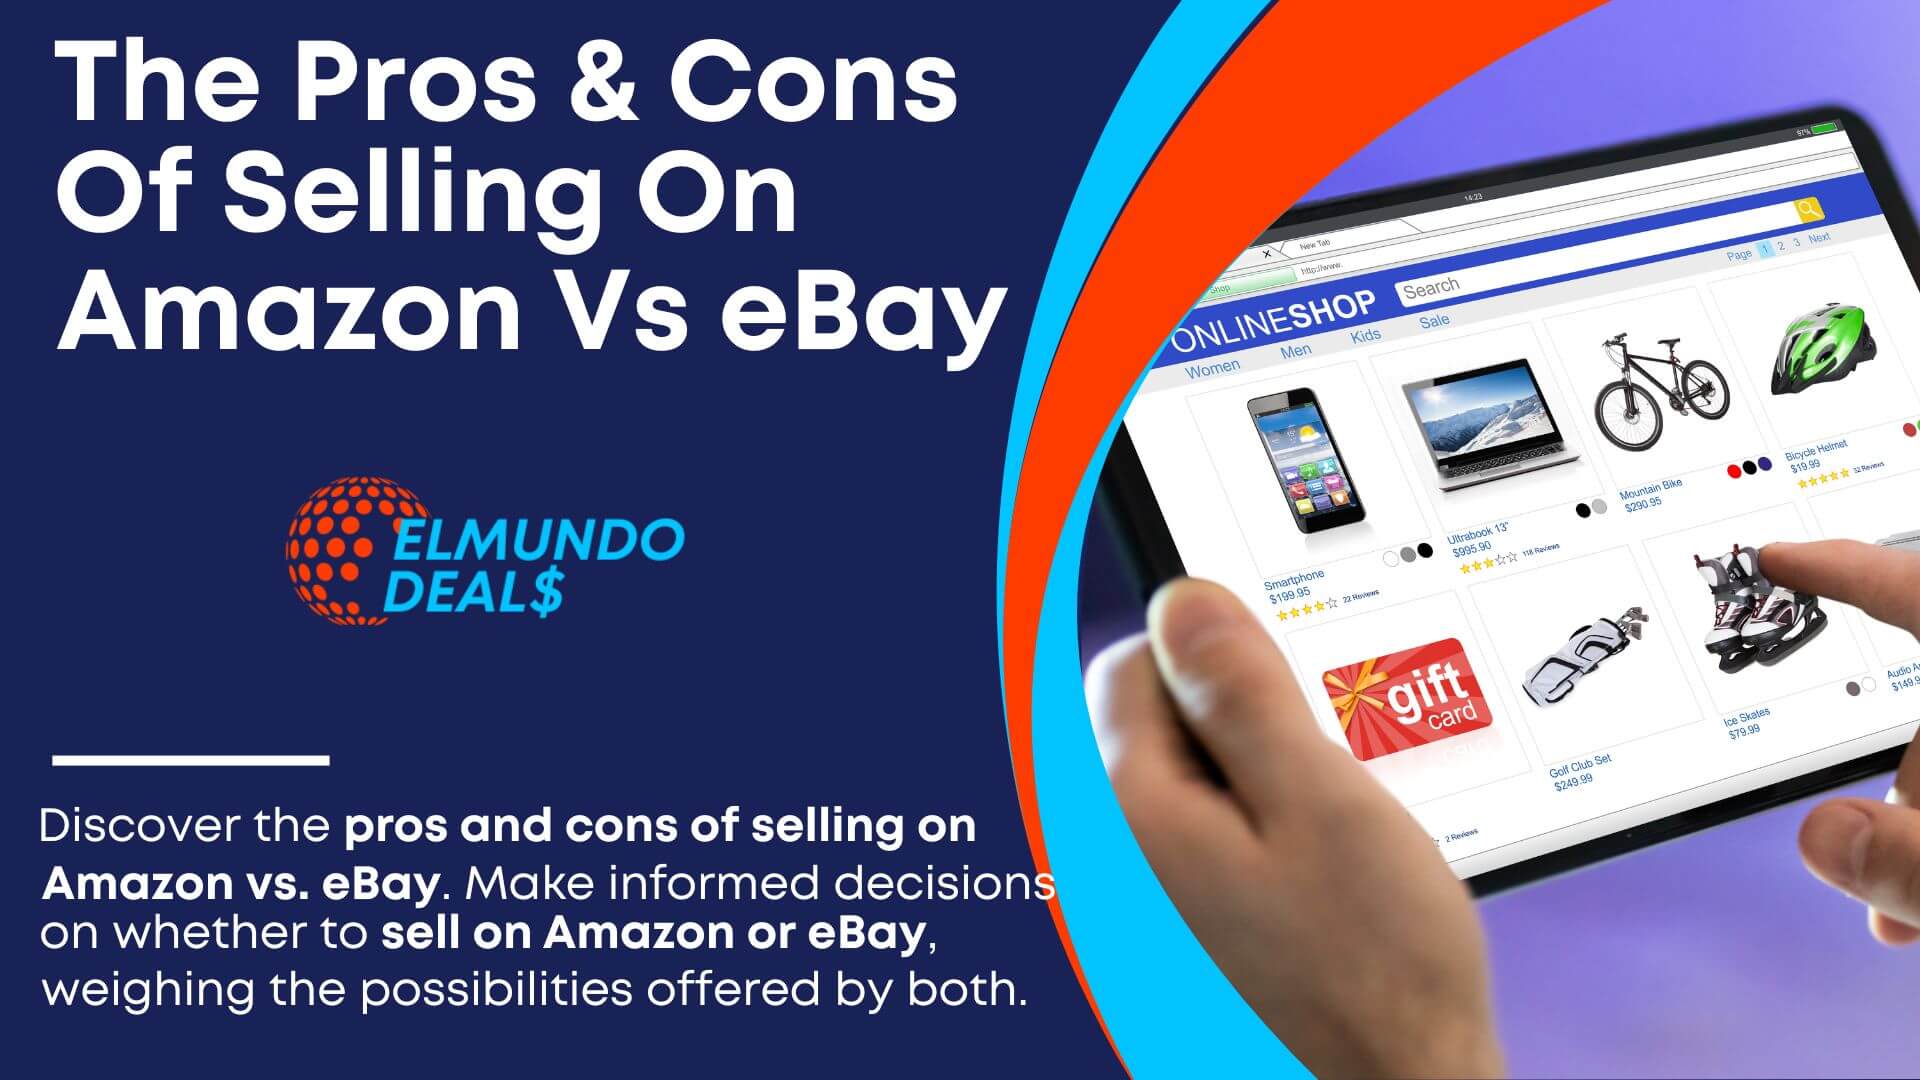 The Pros And Cons Of Selling On Amazon Vs eBay - Better For Sellers?